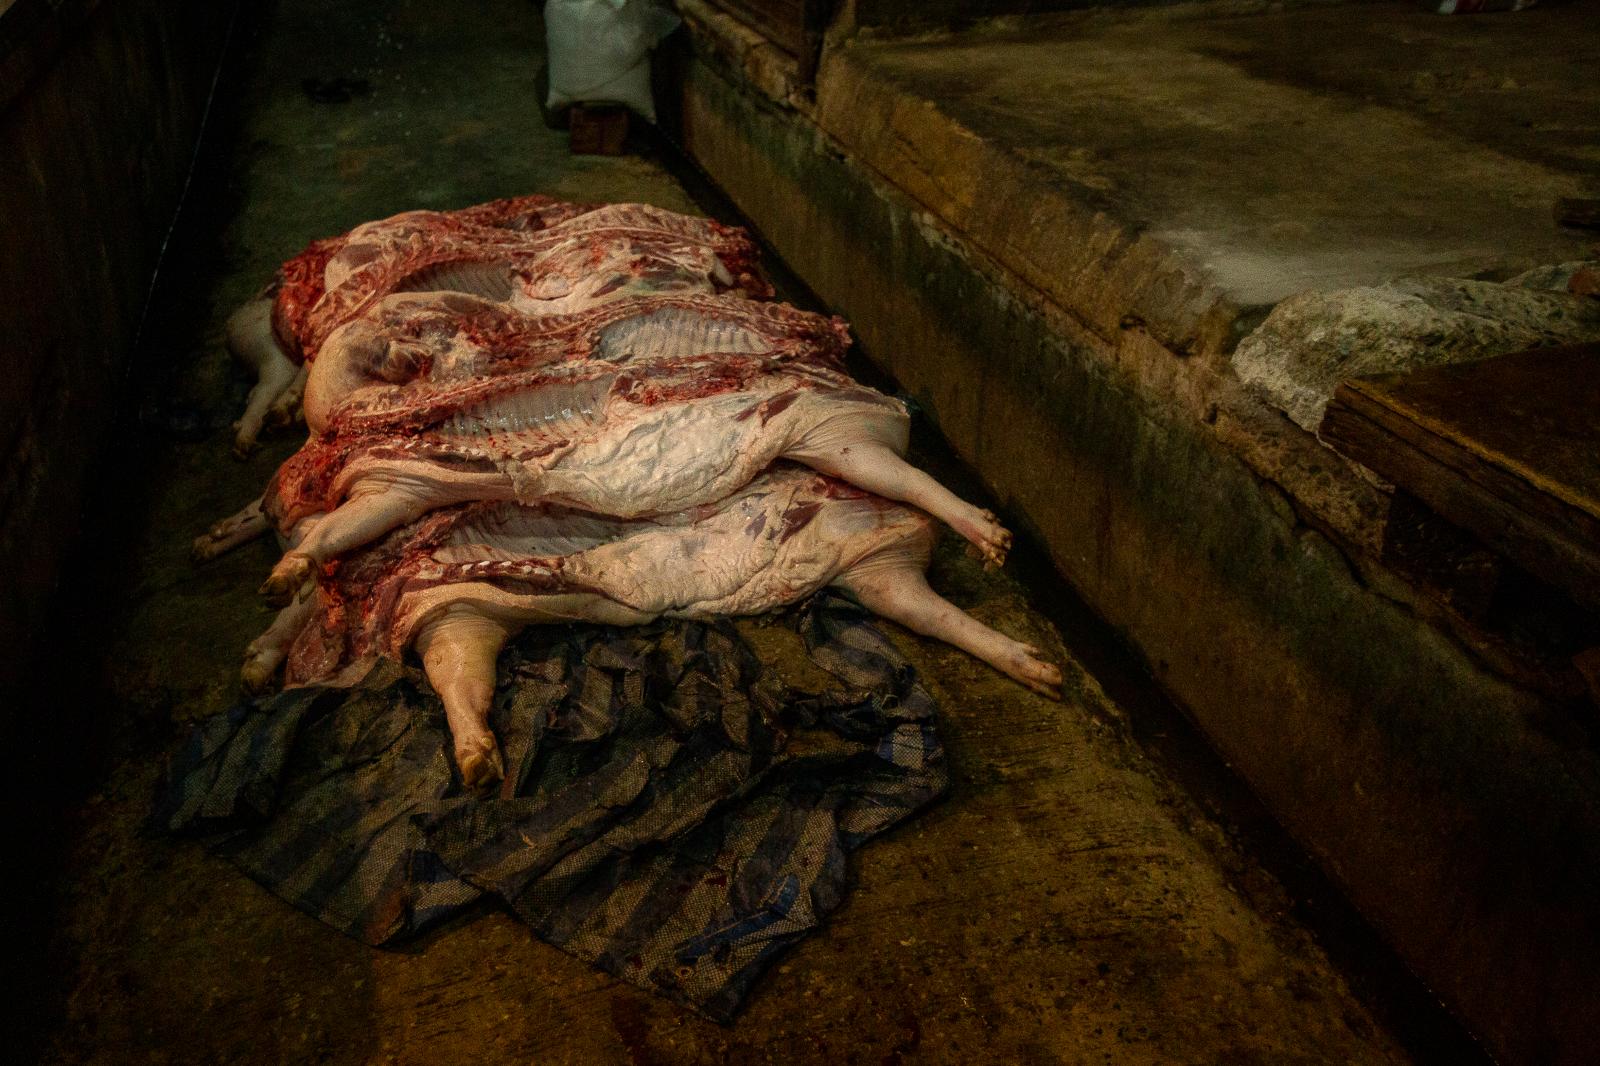 Pig carcasses in front of a butcher shop in the market